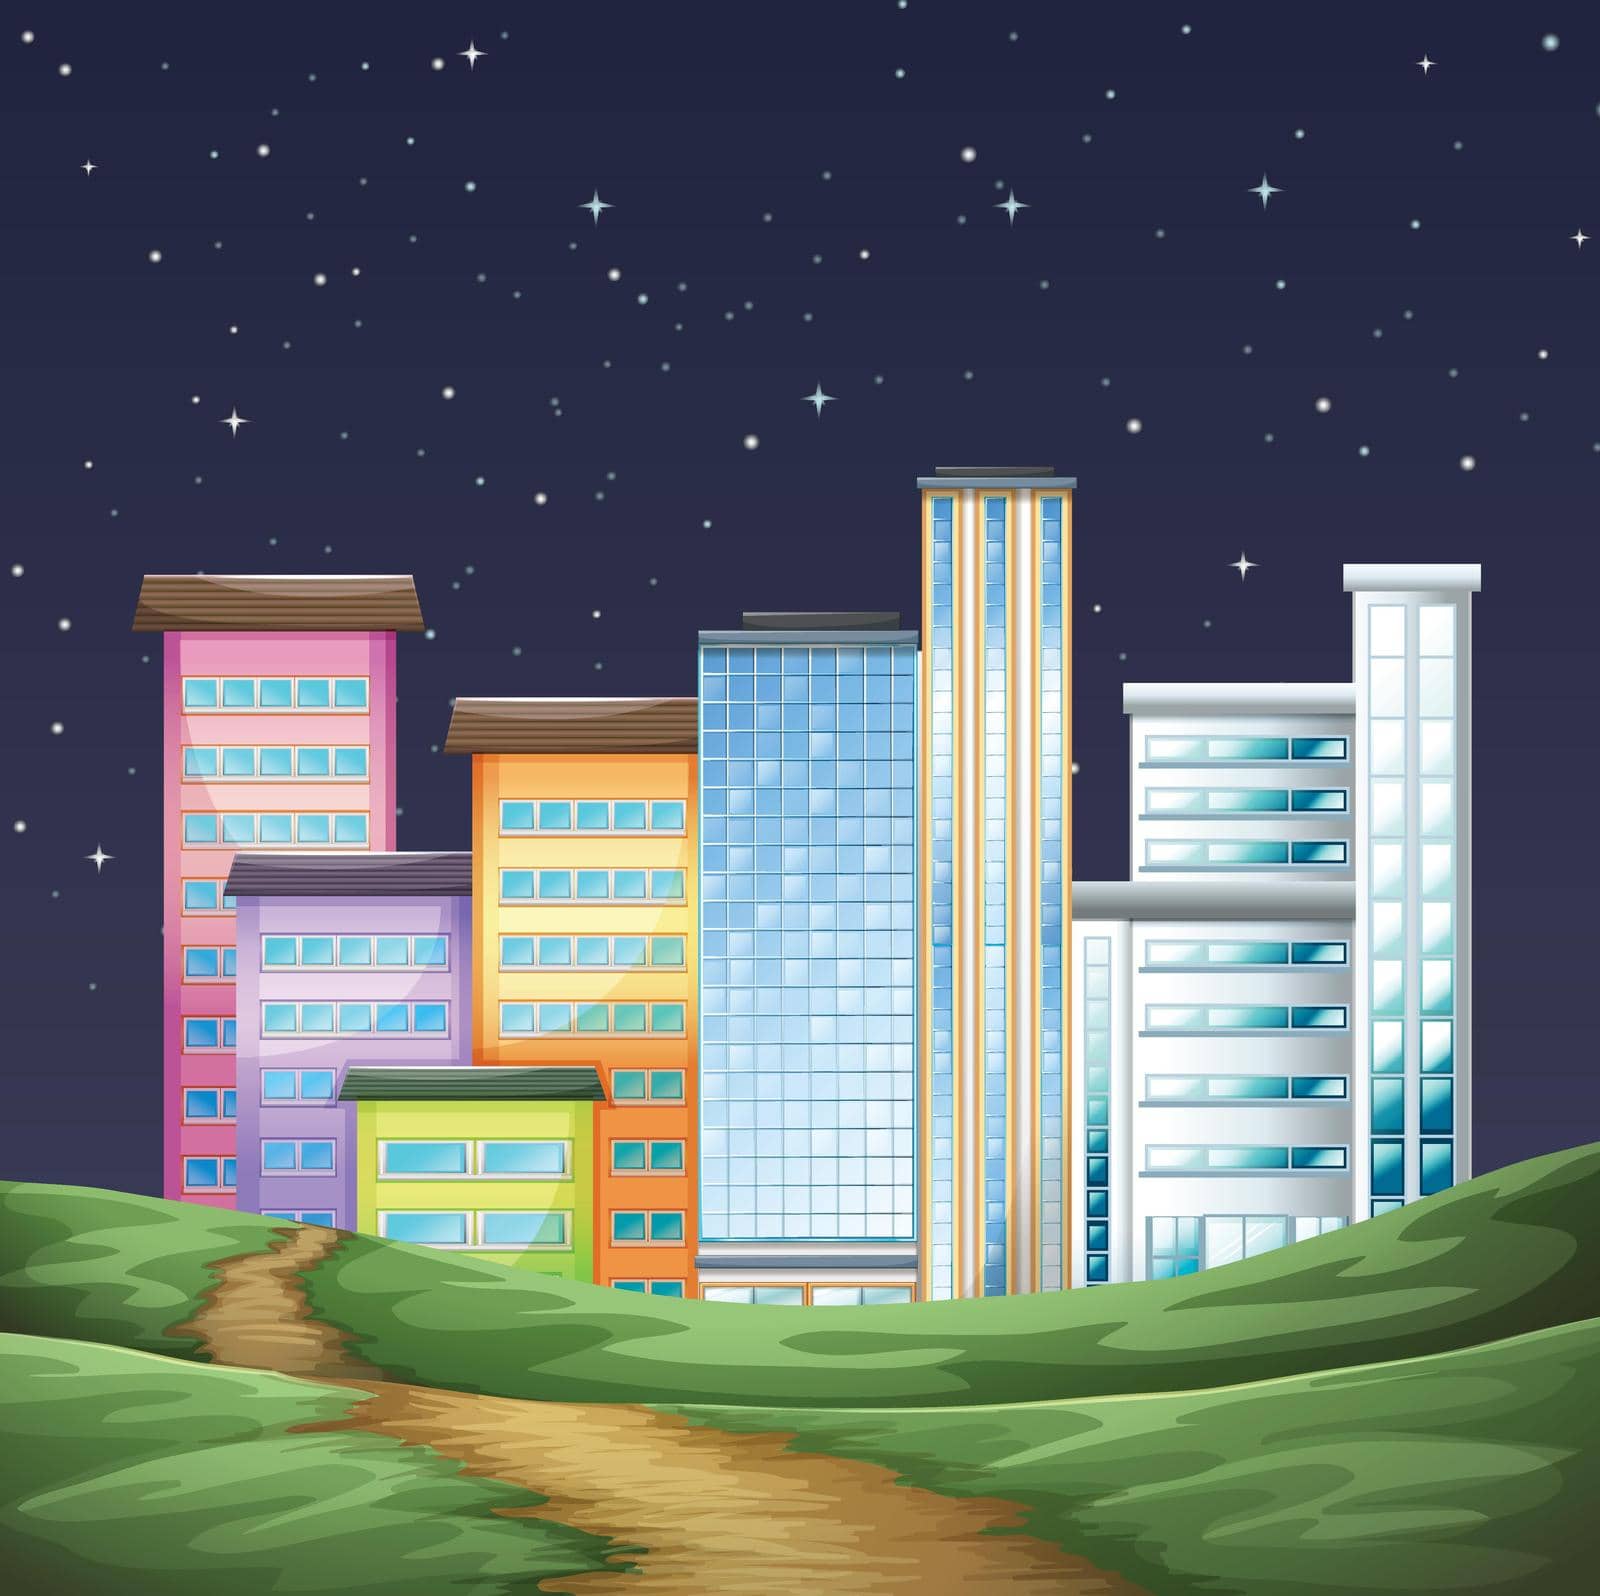 Park and buildings in the city at night illustration